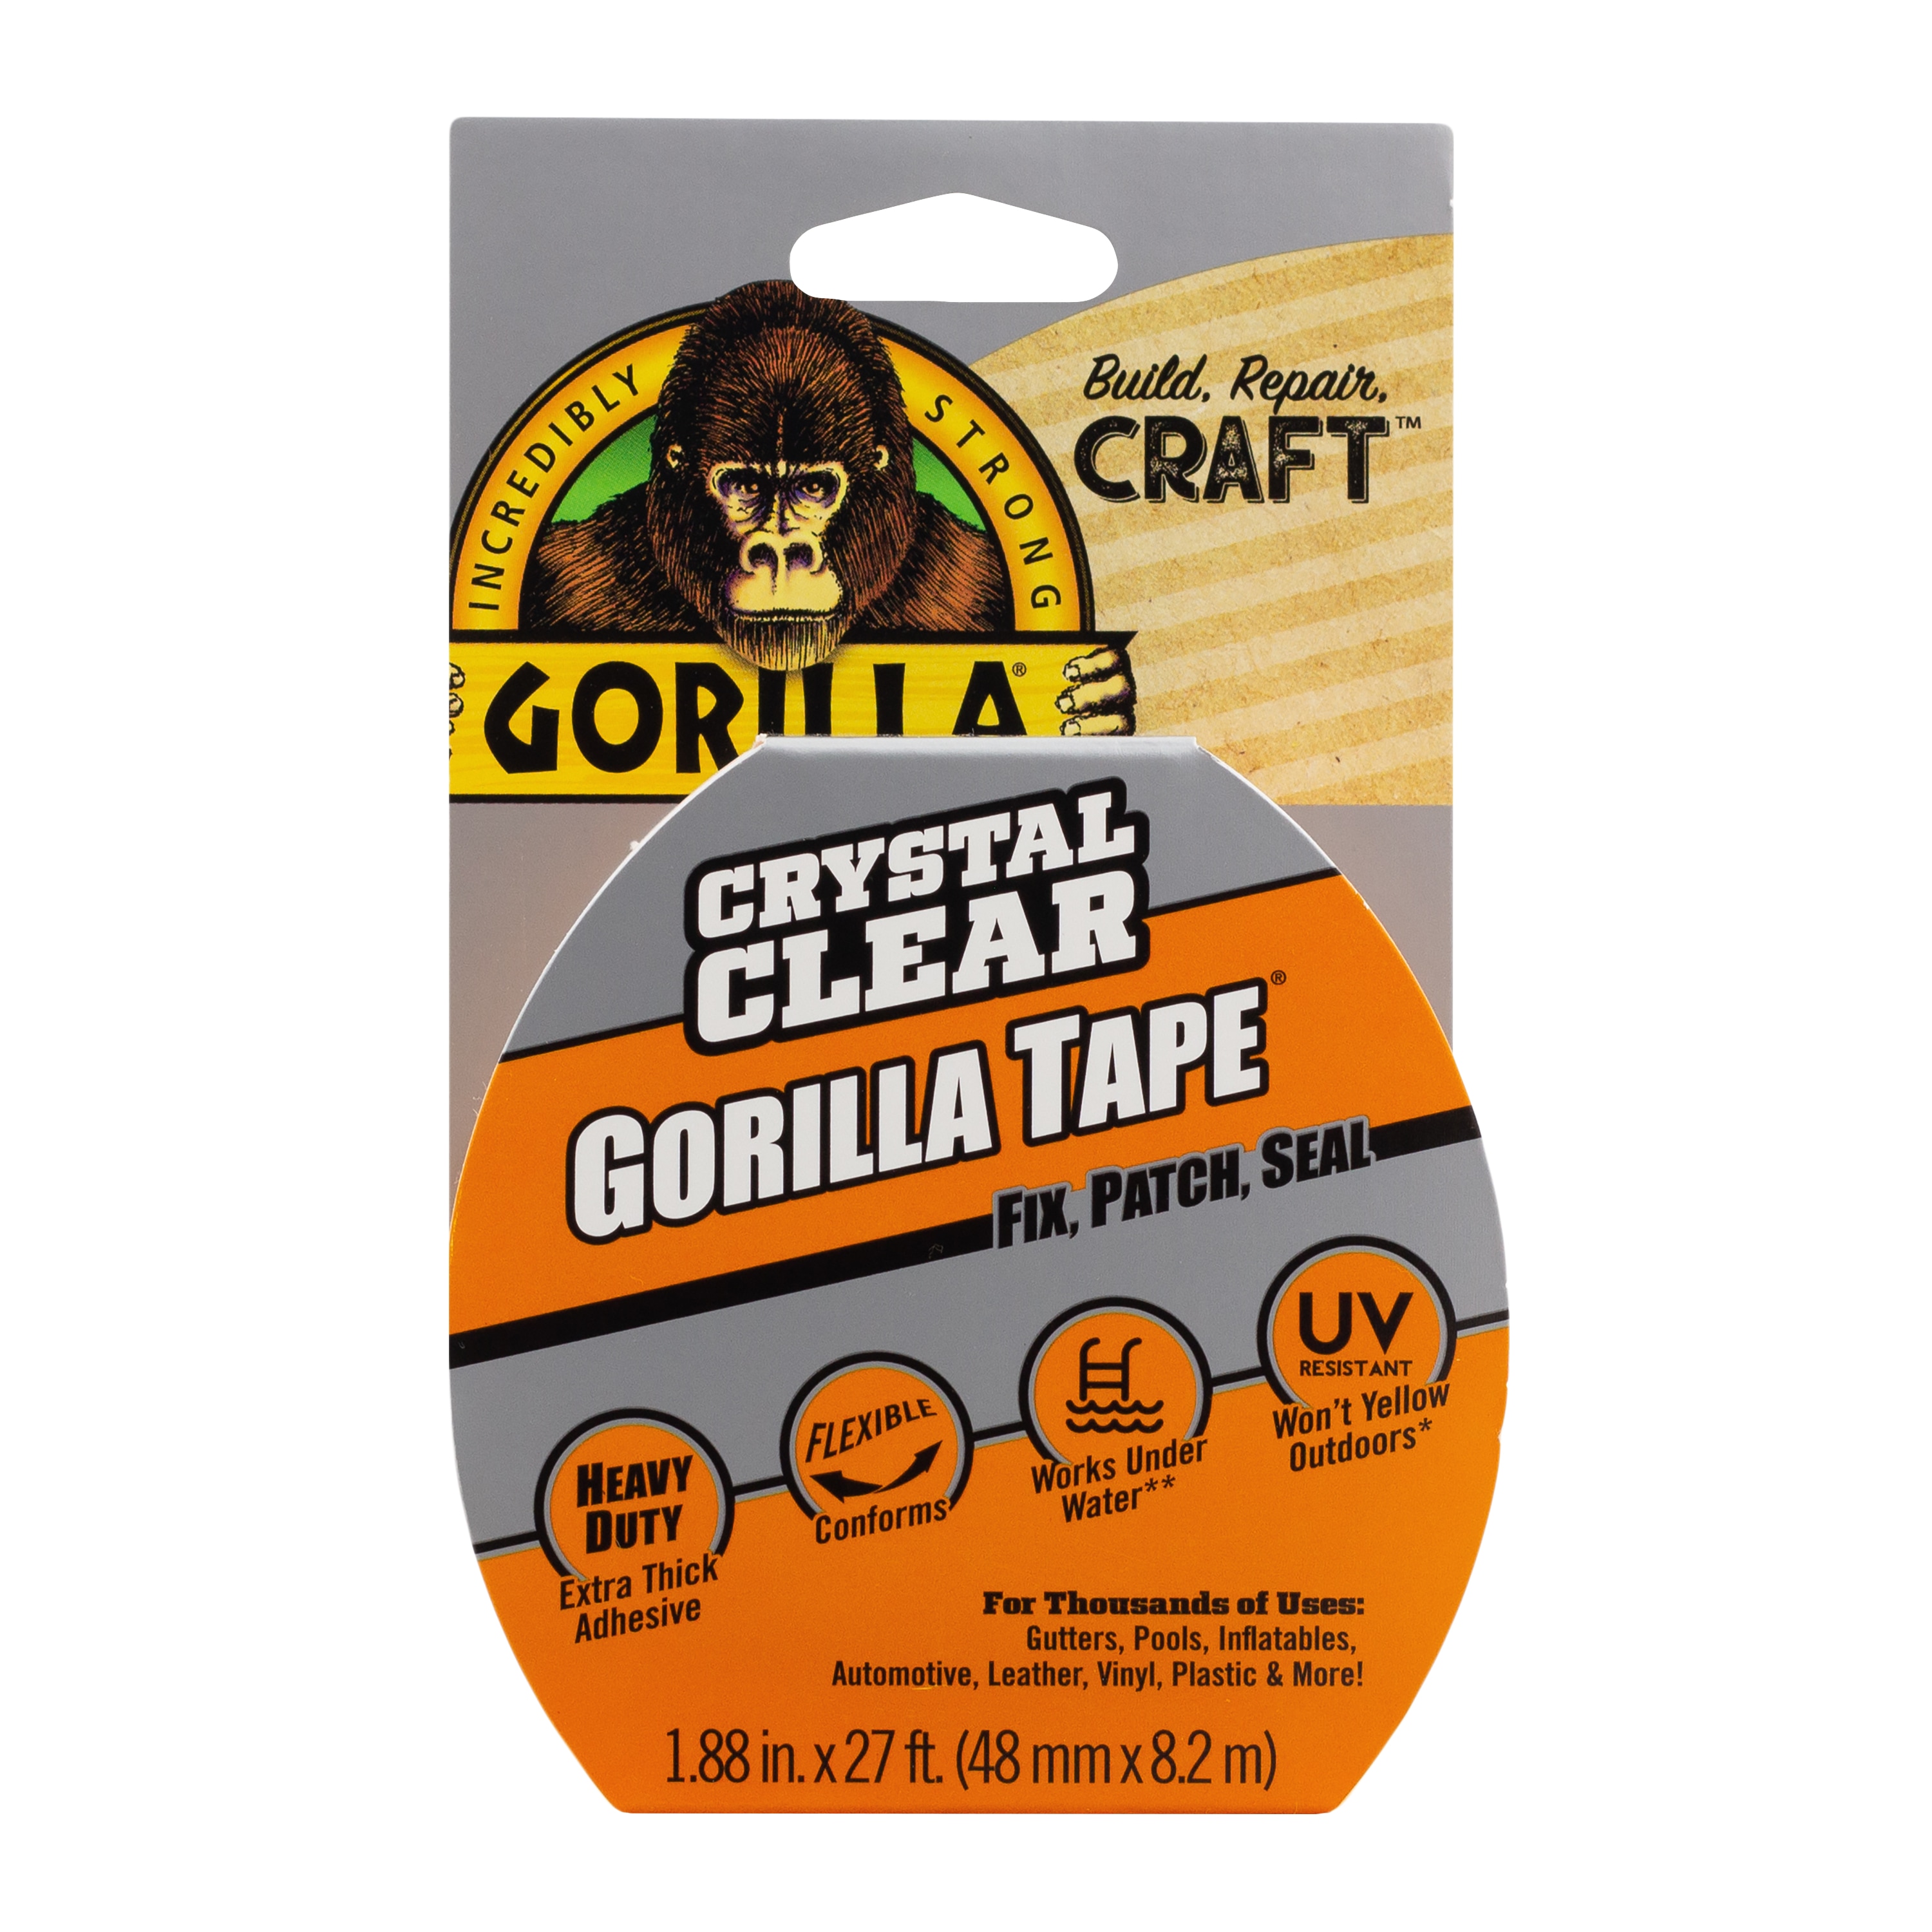 Pack of 1 Fix Patch Seal Clear, Gorilla Crystal Clear Duct Tape 1.88” x 9 yd 